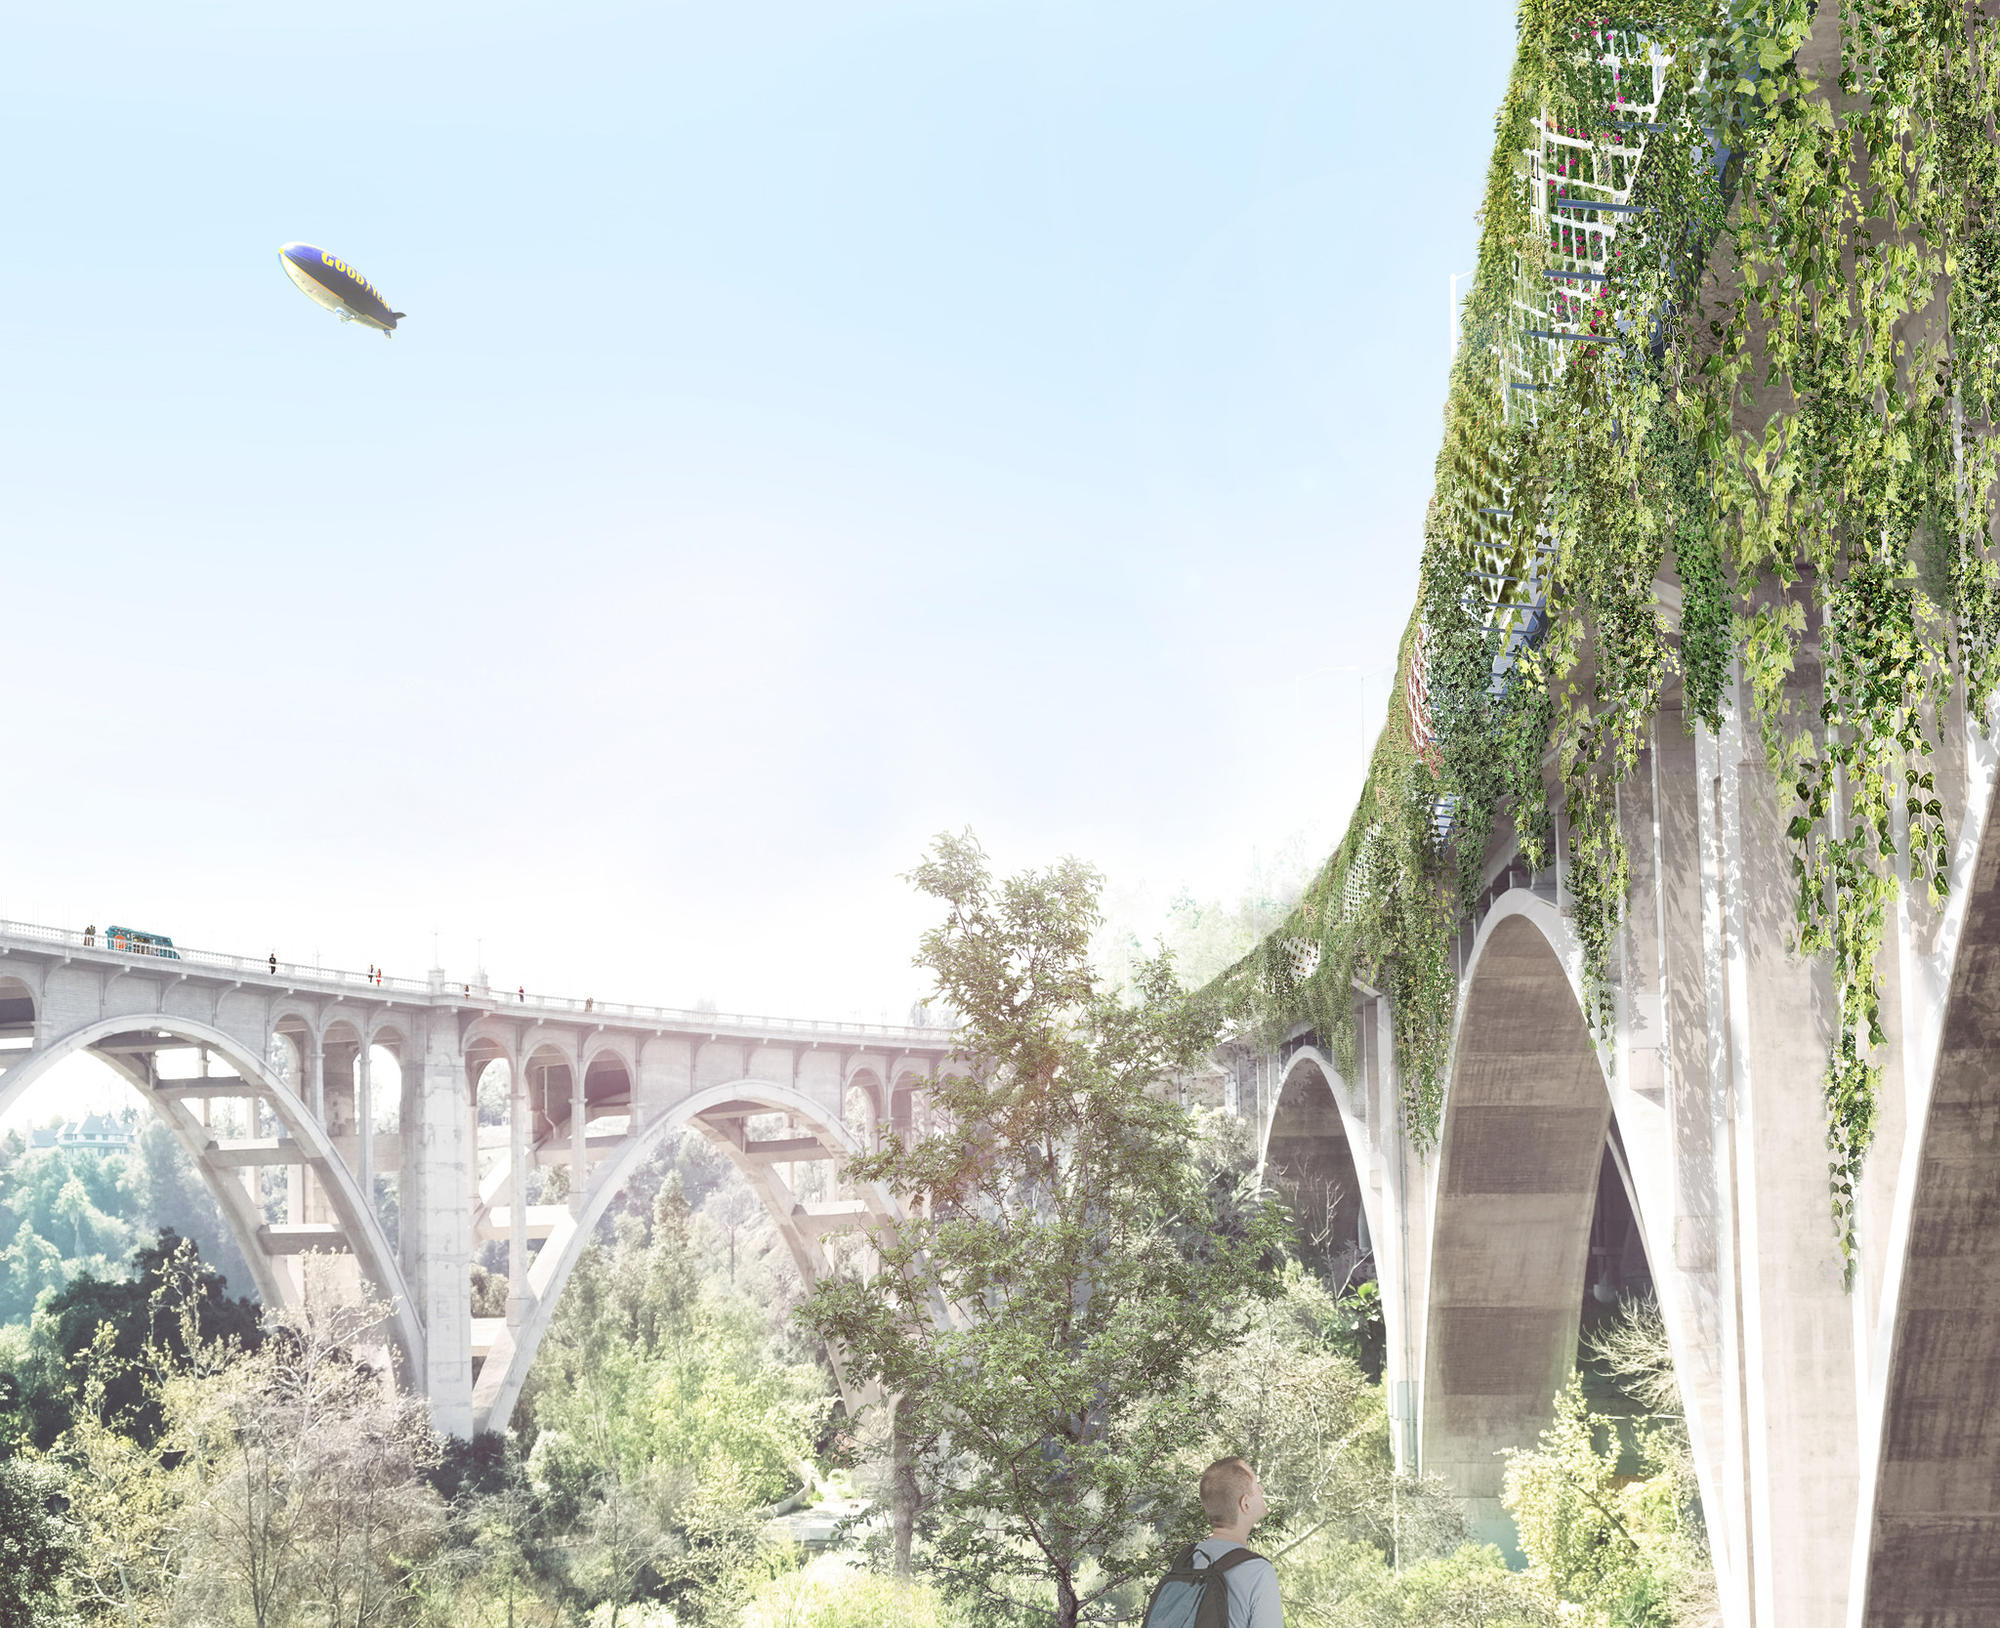 A rendering view from below of architect Michael Maltzan's plan to wrap the 134 Freeway as it crosses the Arroyo Seco in Pasadena with a tunnel-like form.